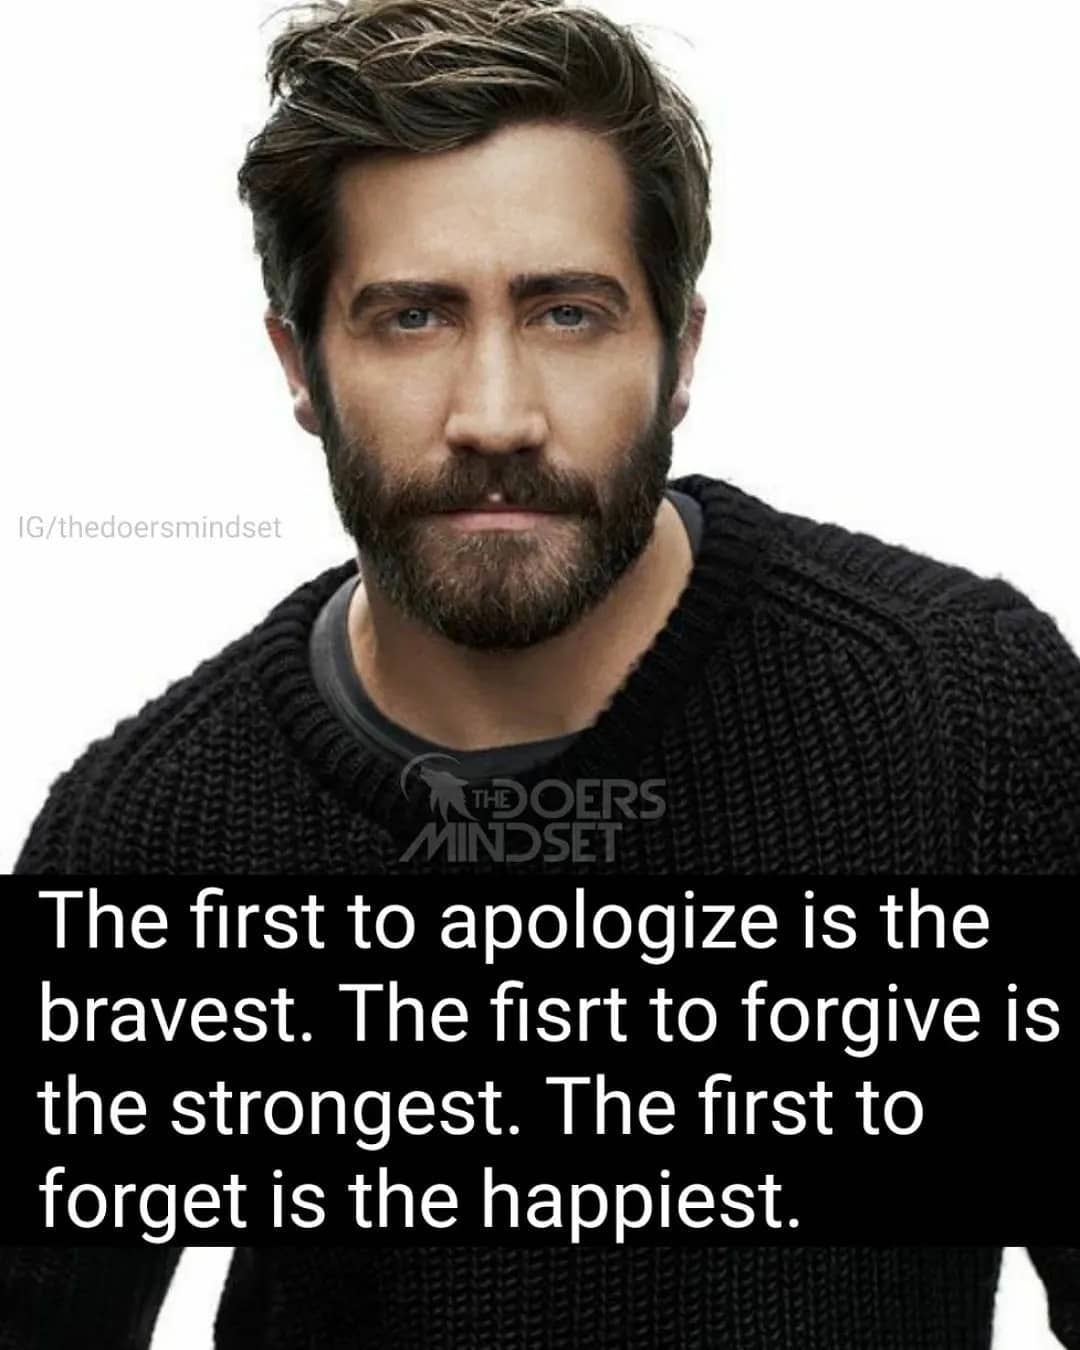 The first to apologize is the bravest. The first to forgive is the strongest. The first to forget is the happiest.